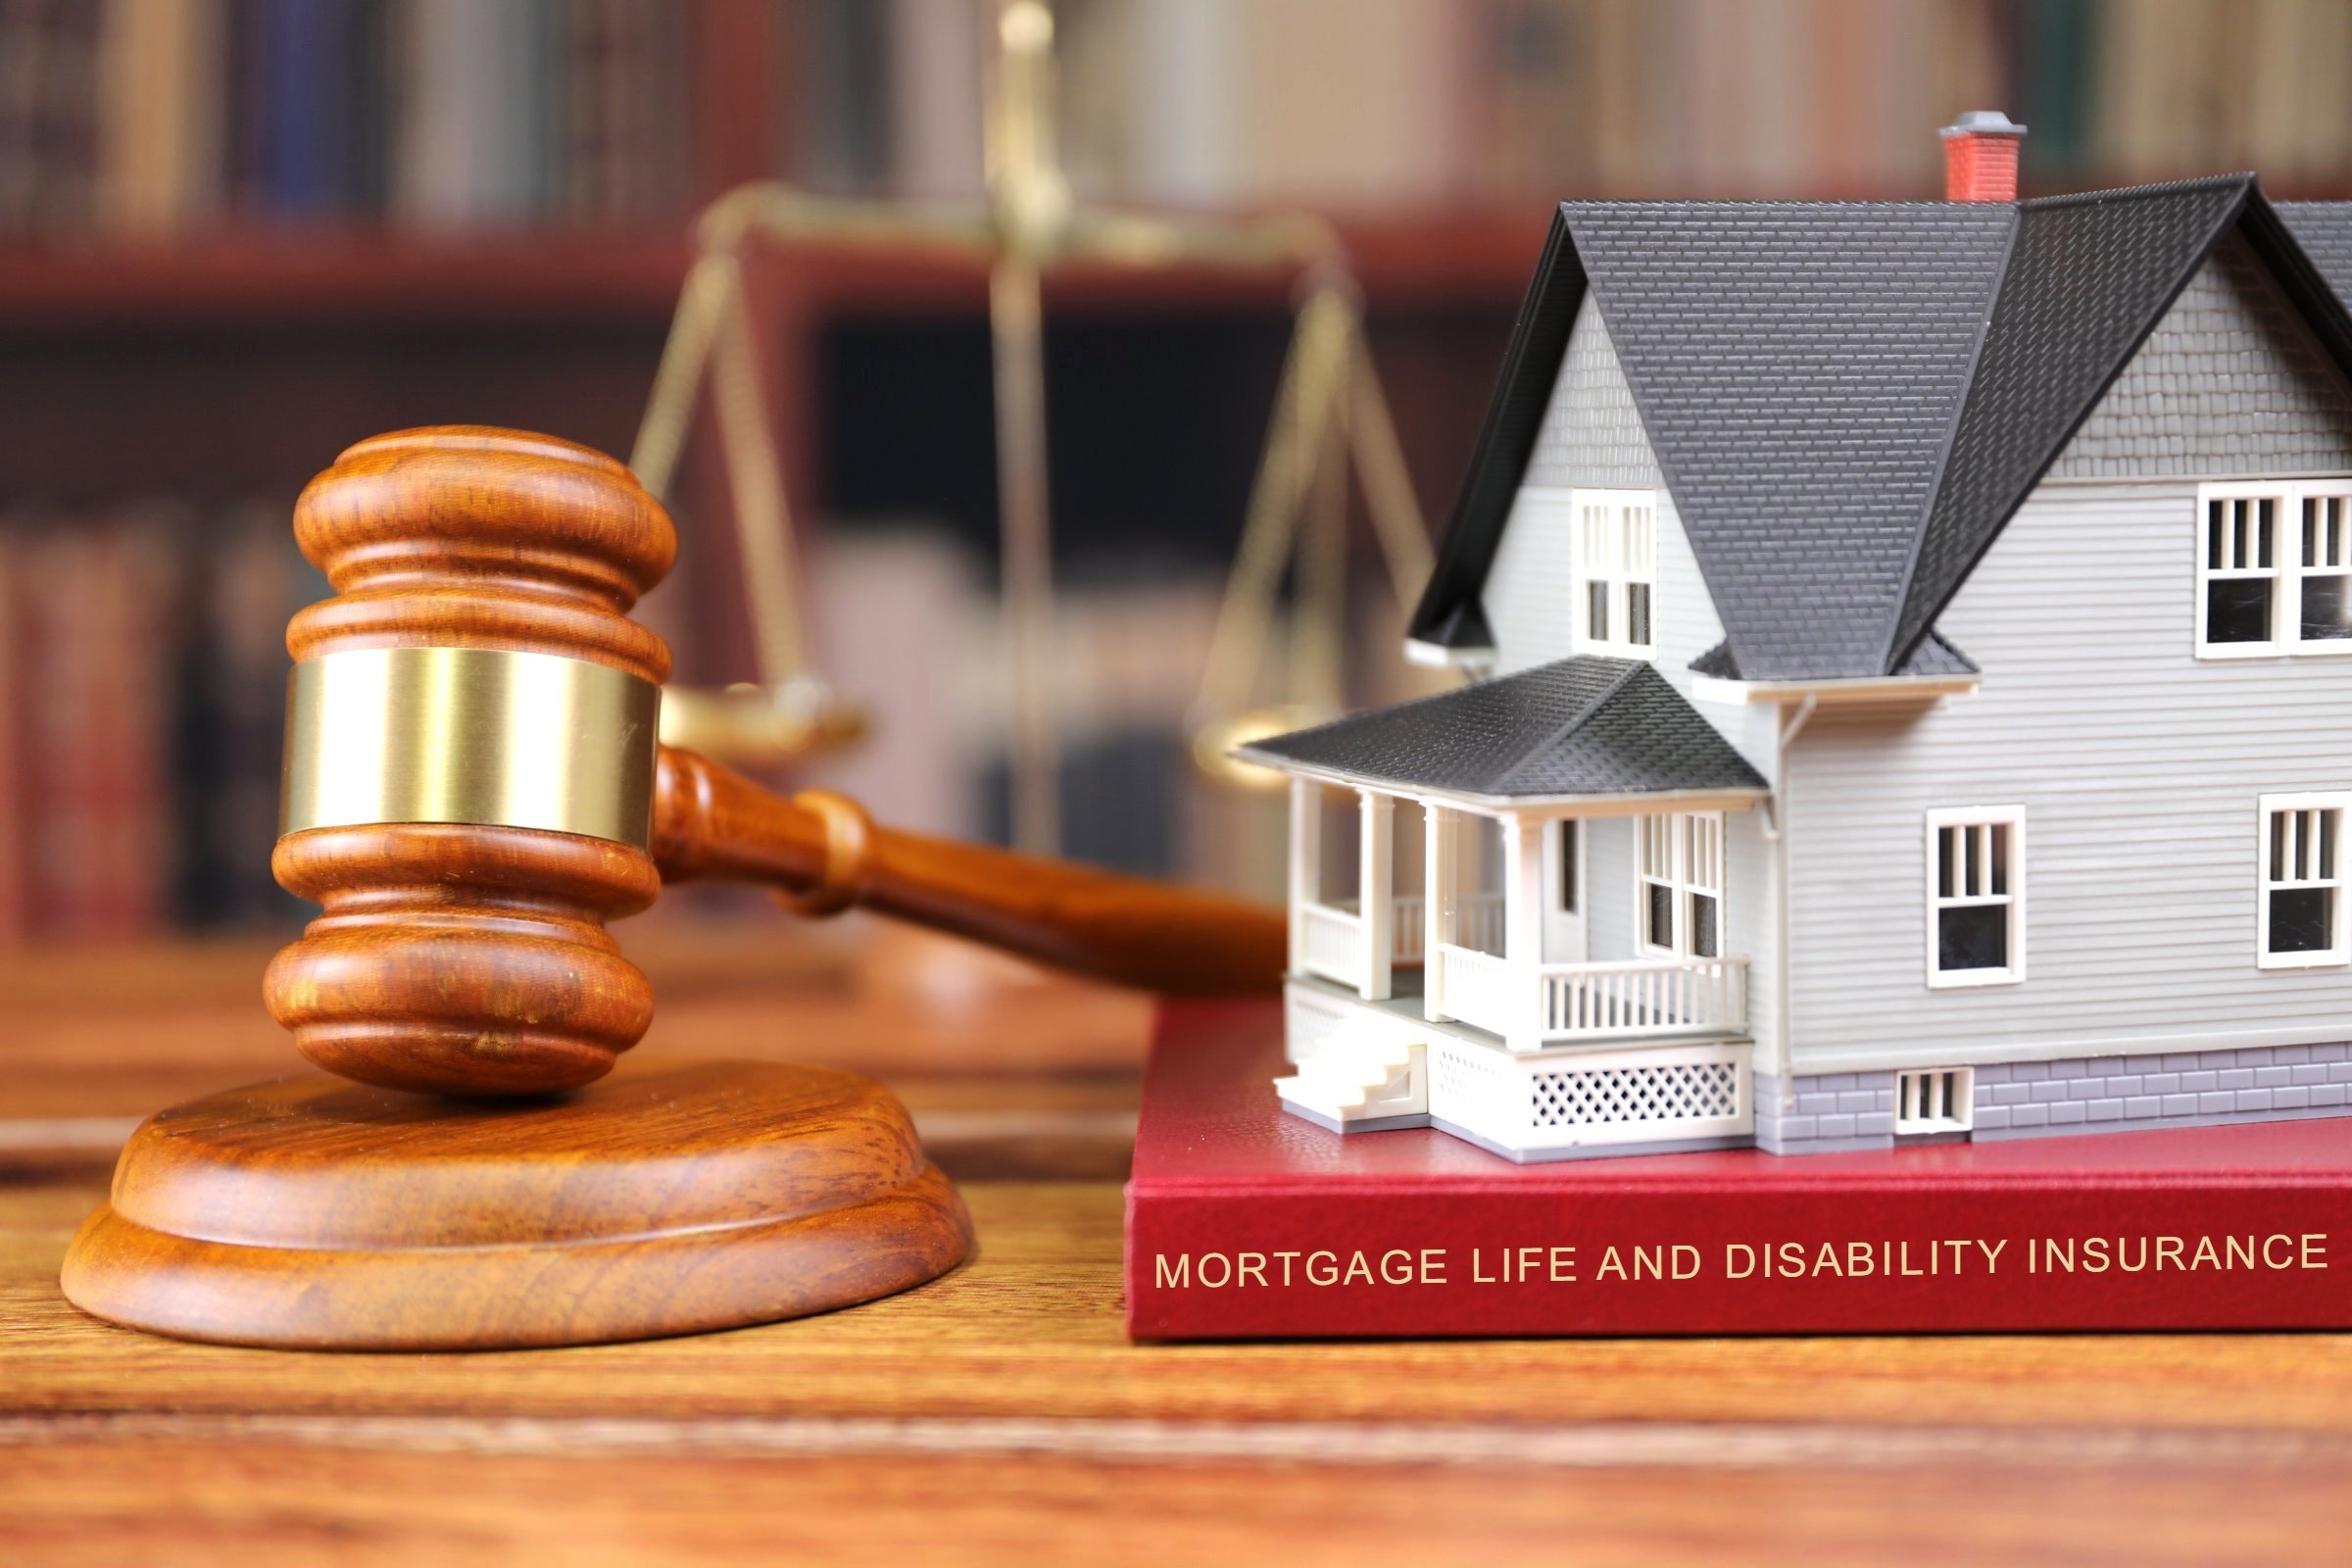 Mortgage Life and Disability Insurance